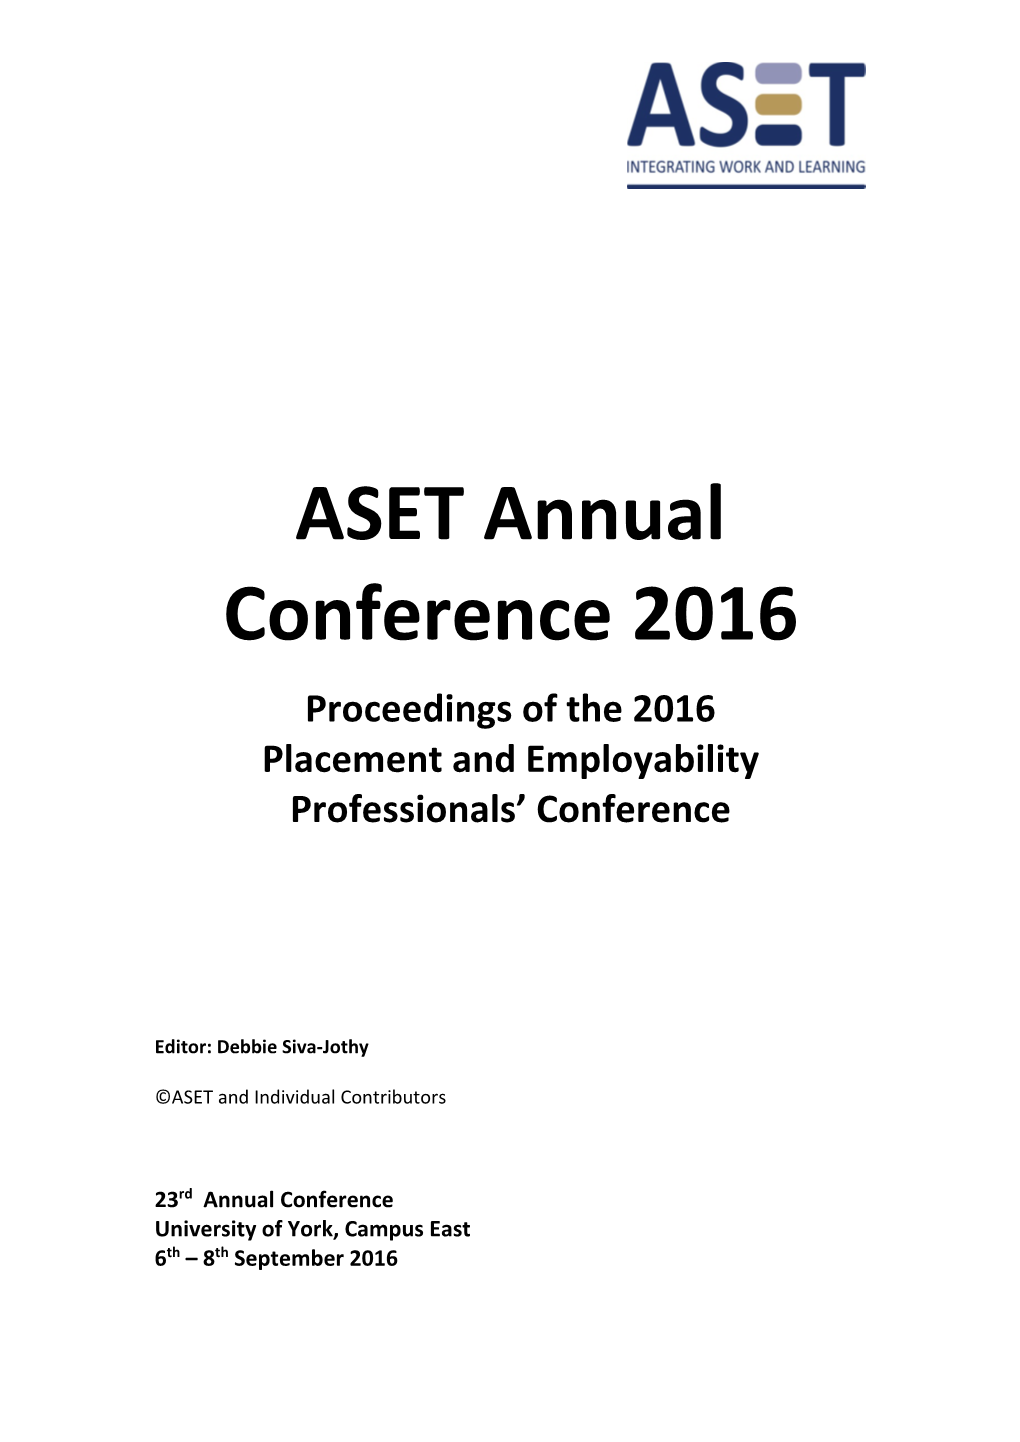 ASET Annual Conference 2016 Proceedings of the 2016 Placement and Employability Professionals’ Conference